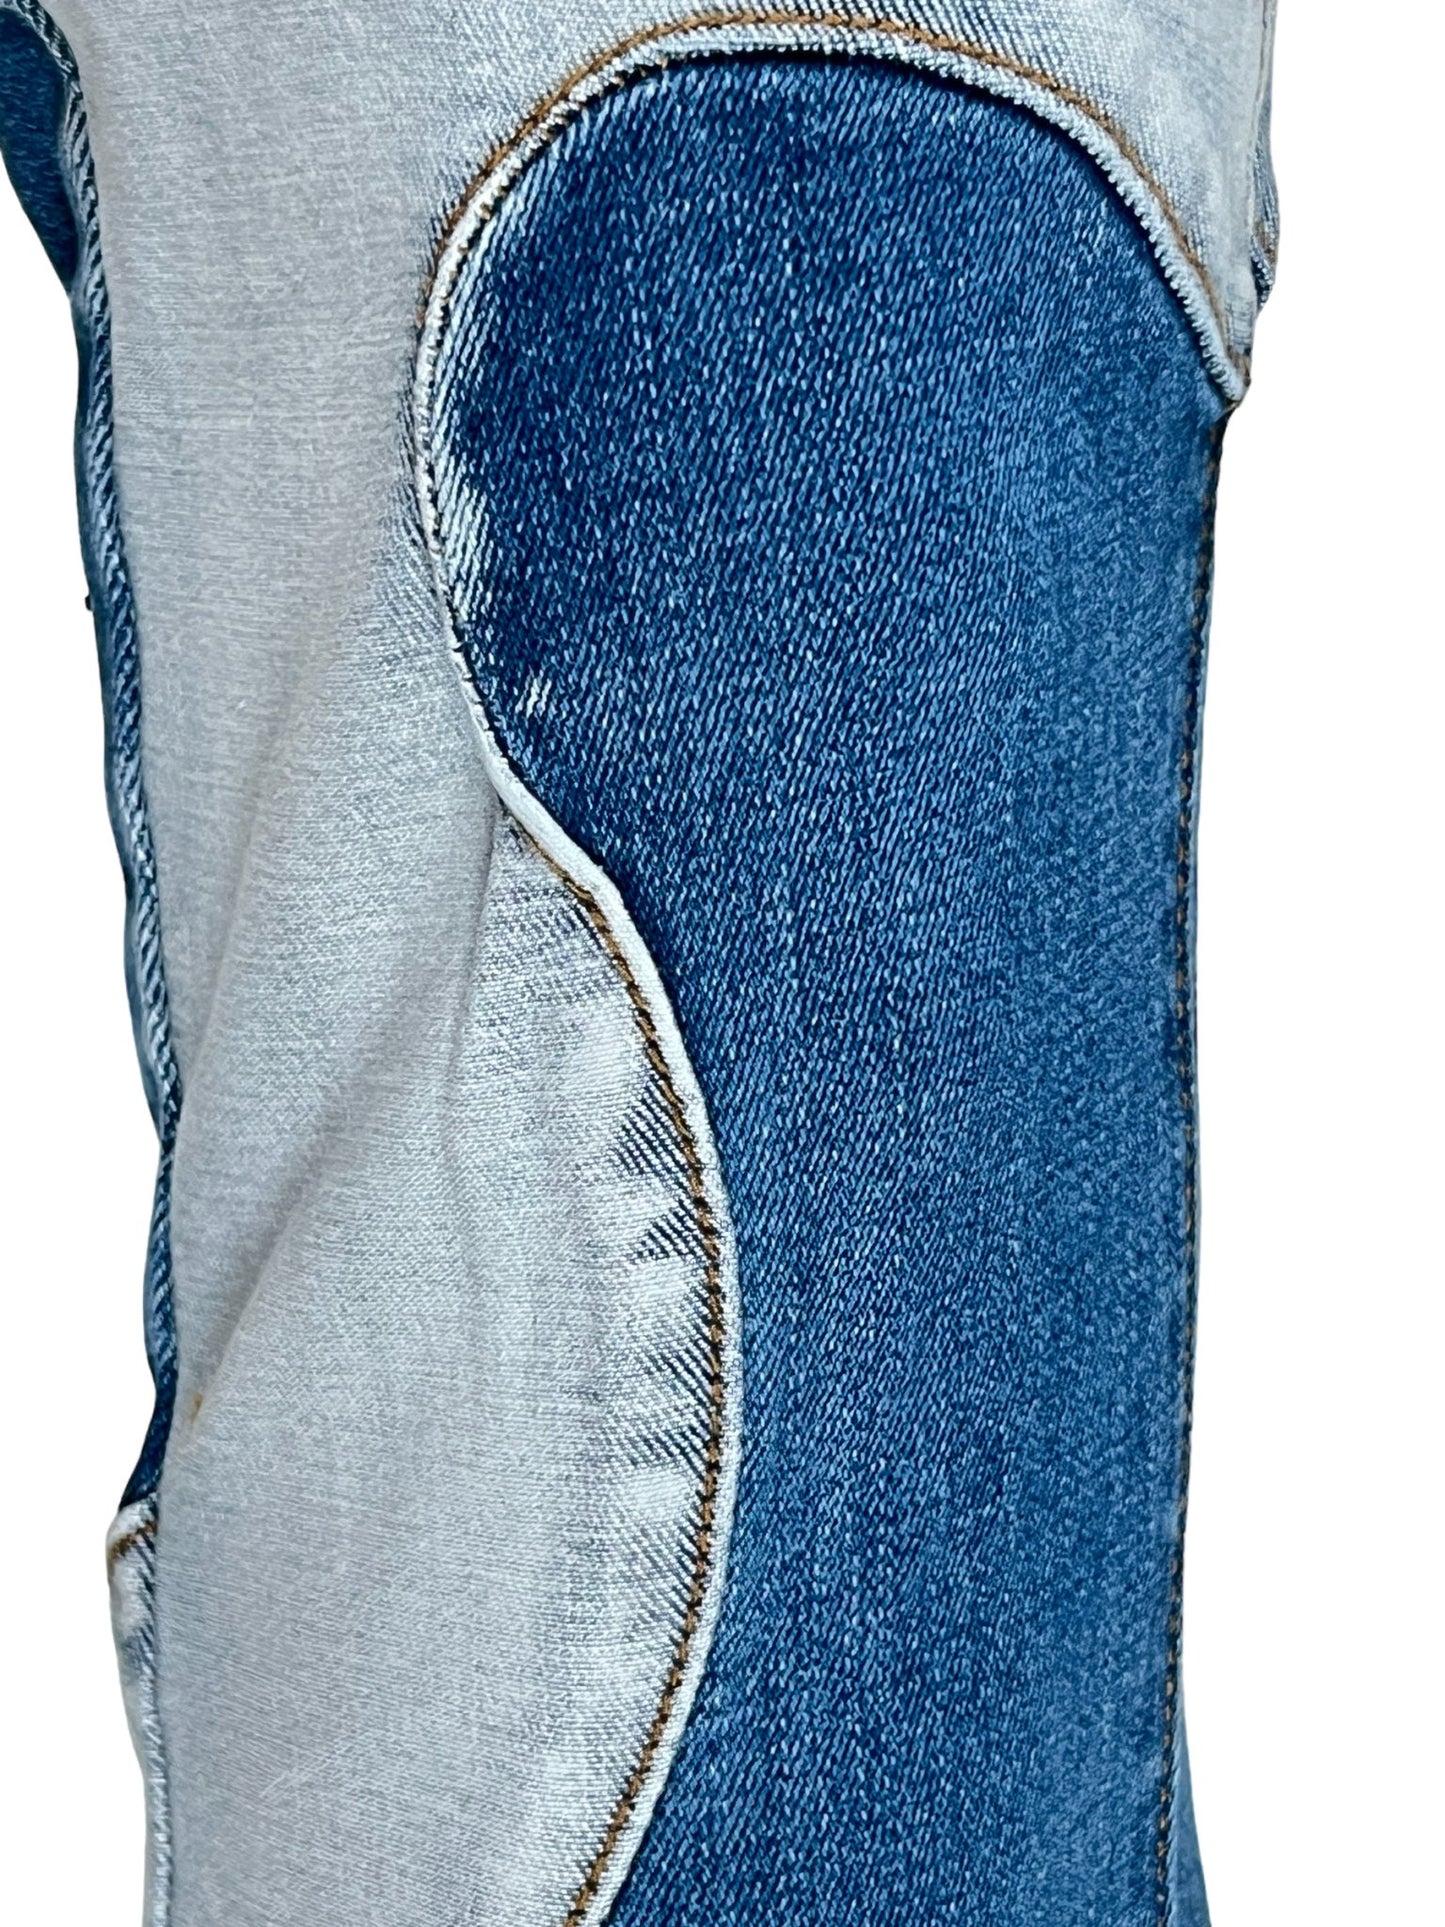 GUAPI VINTAGE BLUE WAVY DENIM patch on a gray shirt with visible stitching.